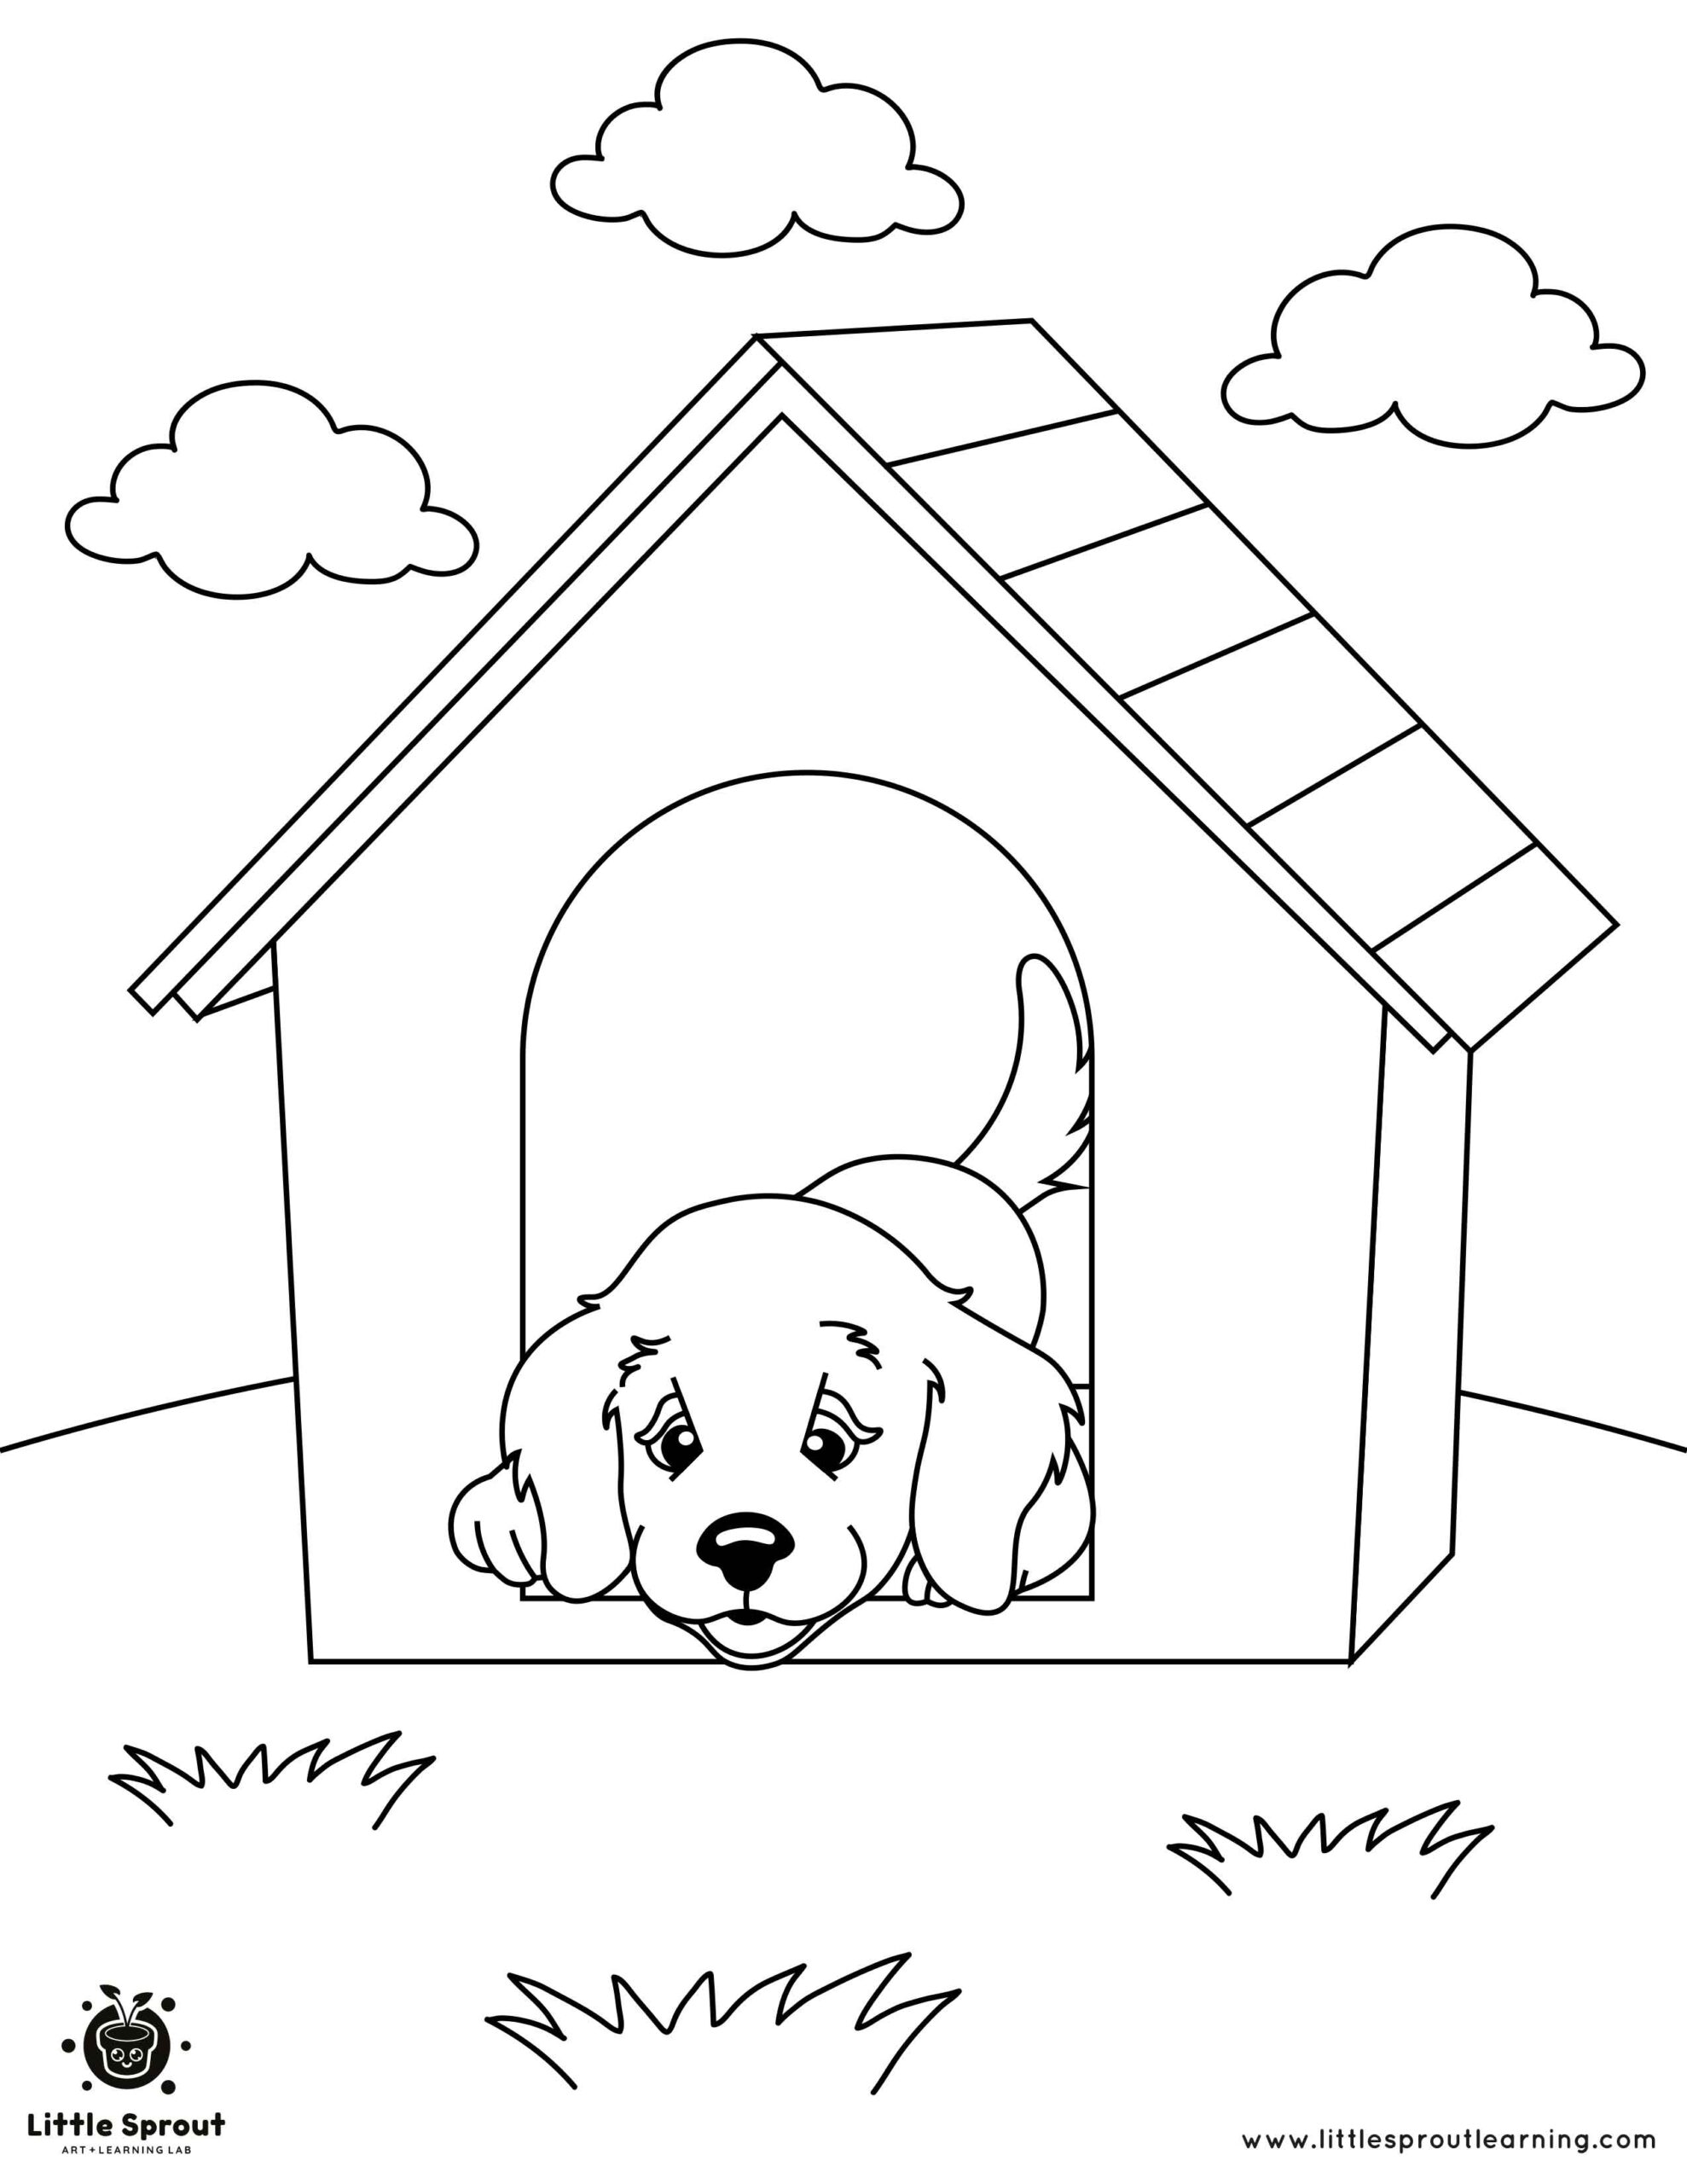 Puppy Coloring Pages - 10 Super Loveable Illustrations - Little Sprout Art  + Learning Lab